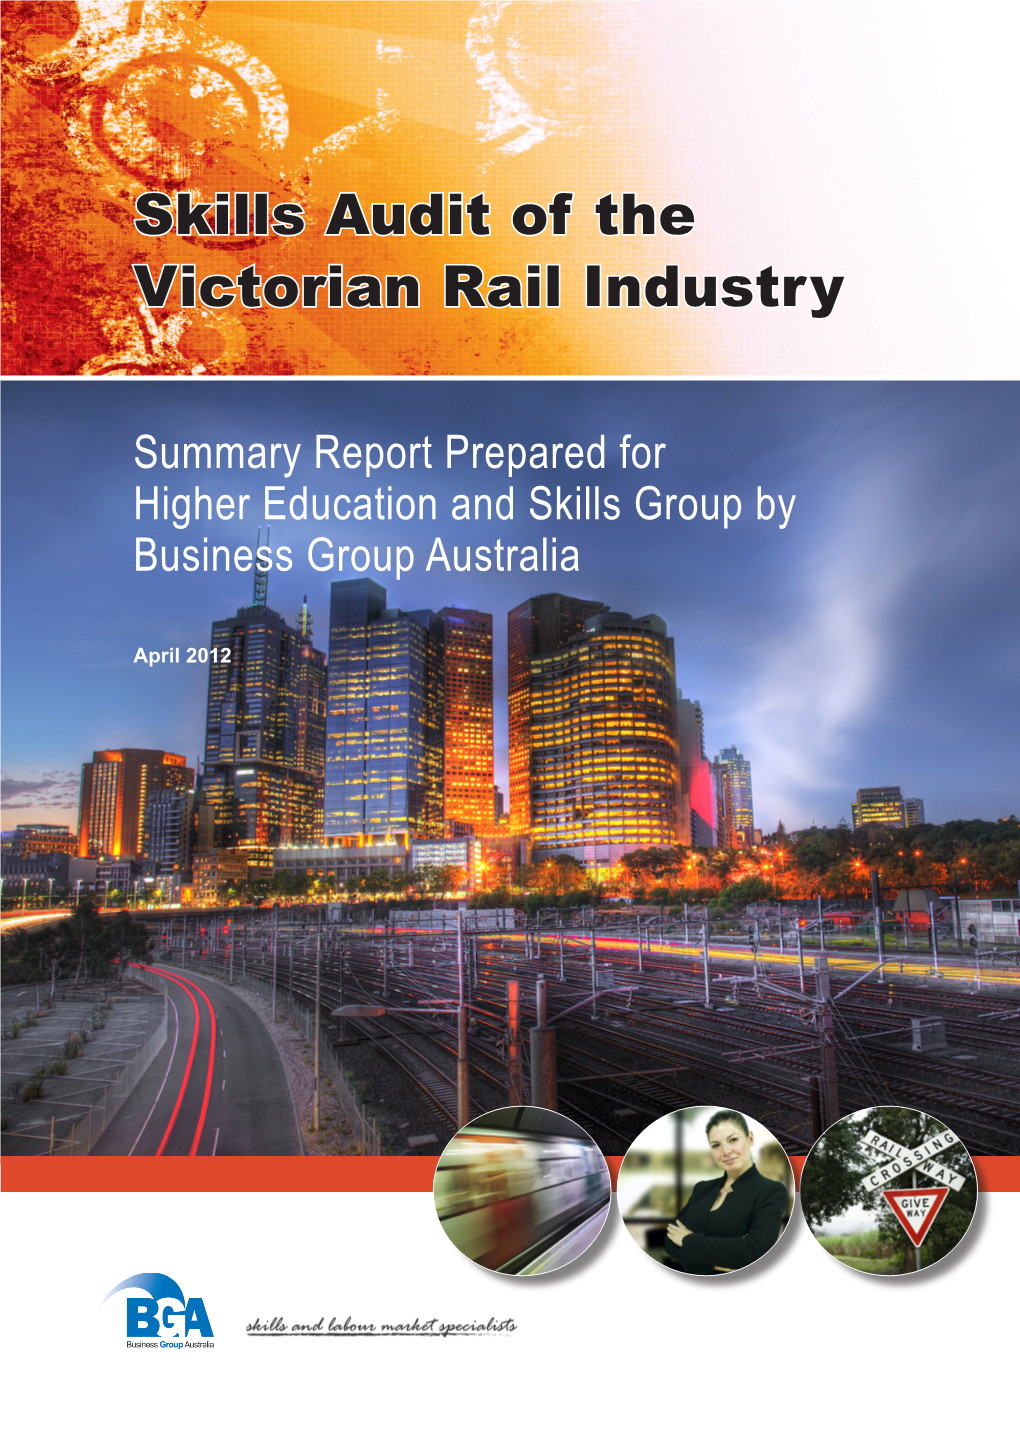 Skills Audit of the Victorian Rail Industry